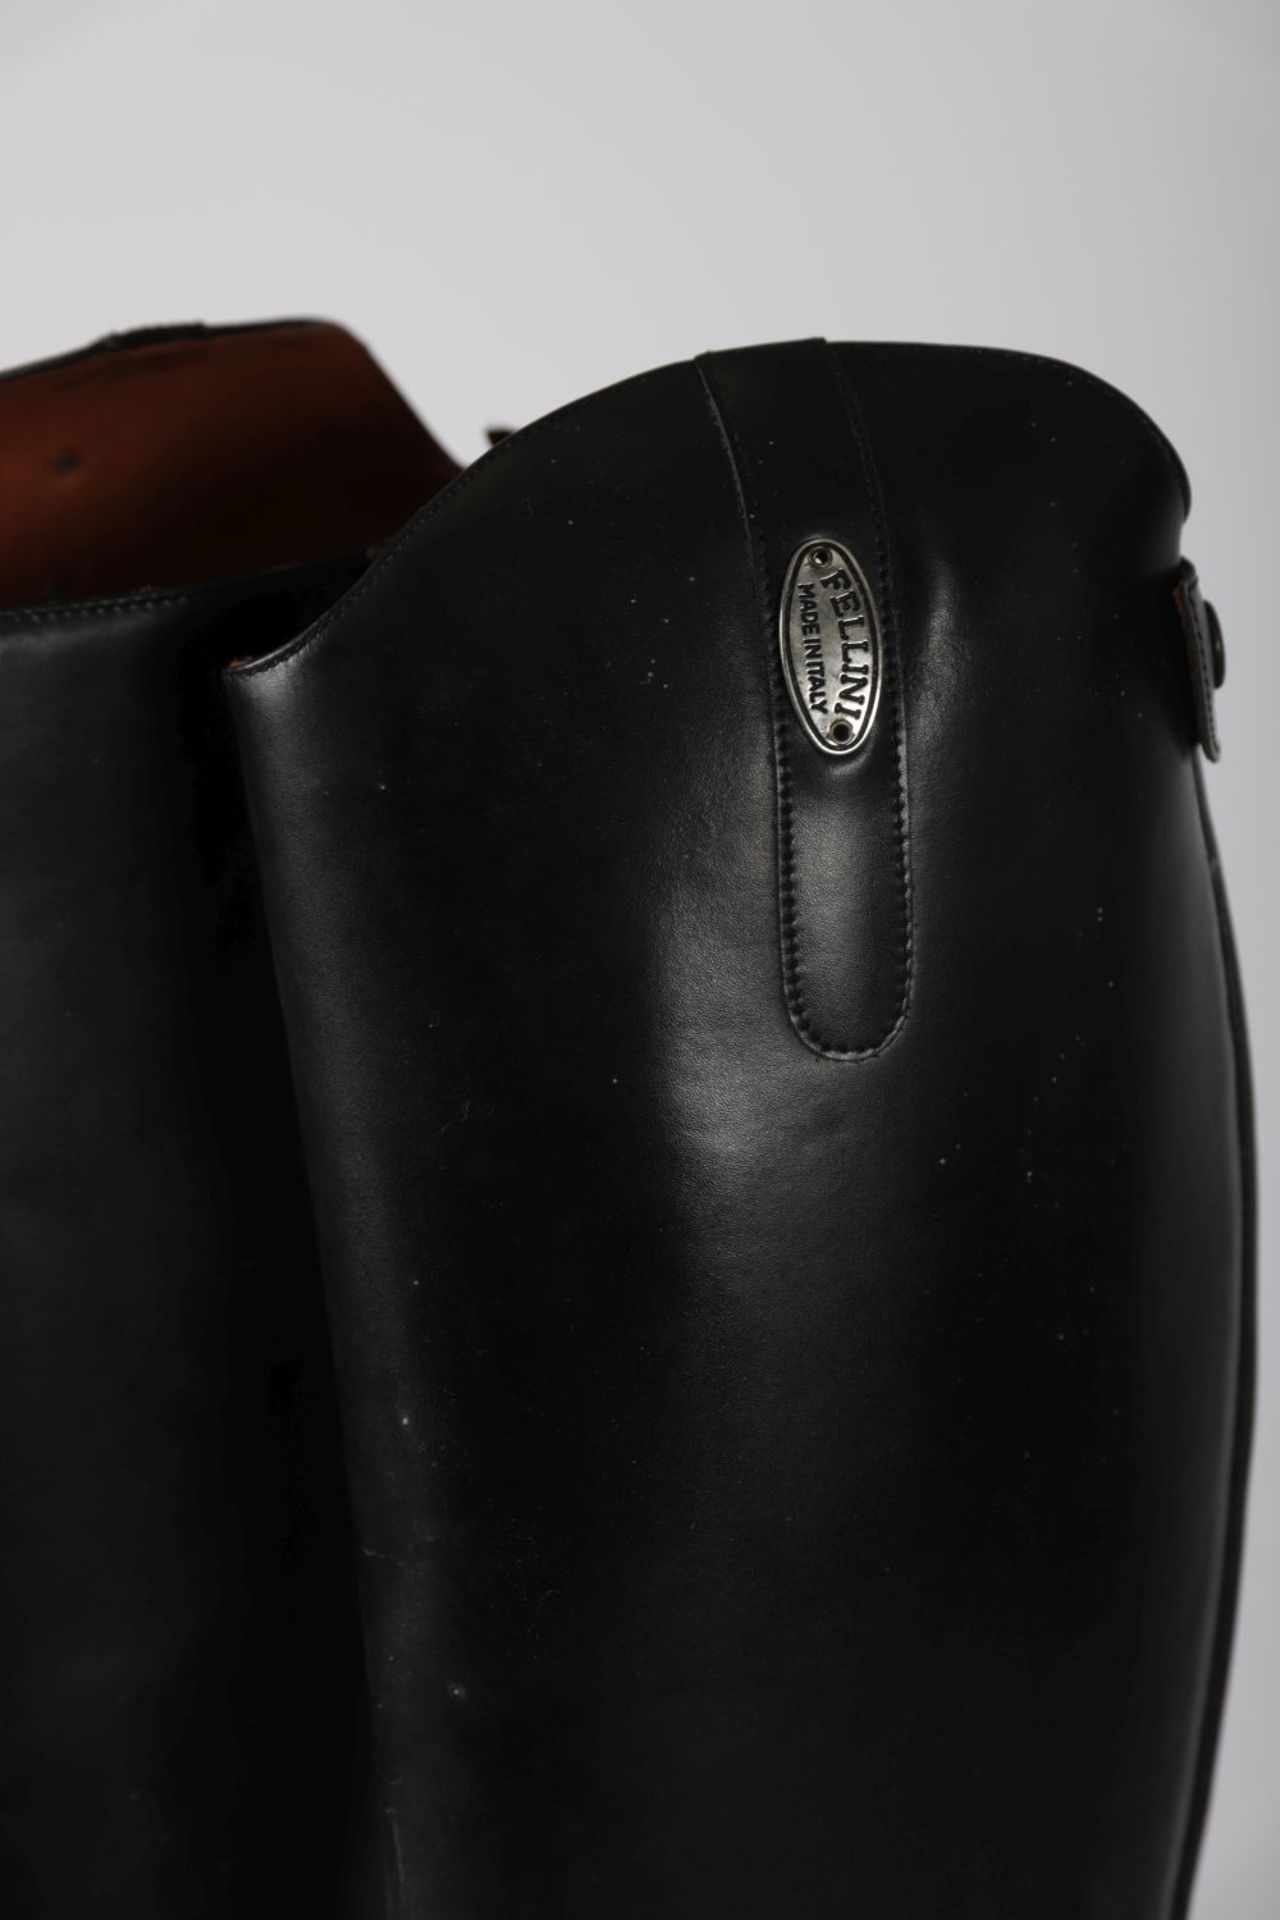 PAIR FELLINI RIDING BOOTS - Image 2 of 3